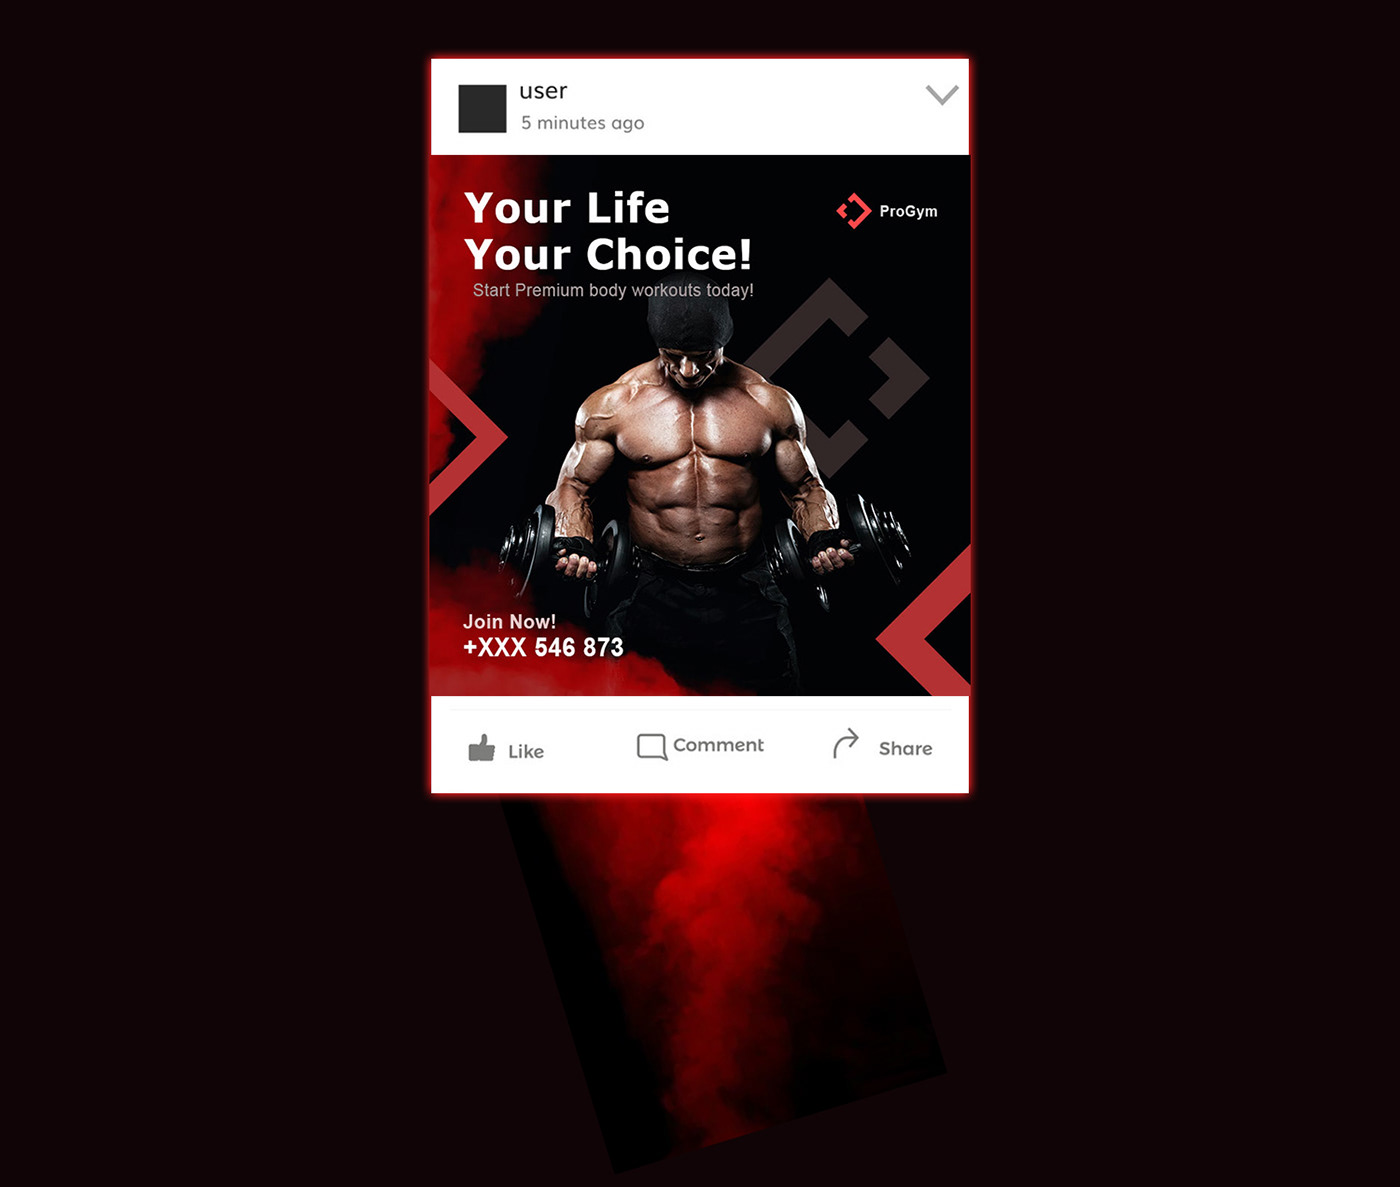 Advertising Banner Ads for a gym designed by Rejwan Islam Rizvy. RIR360